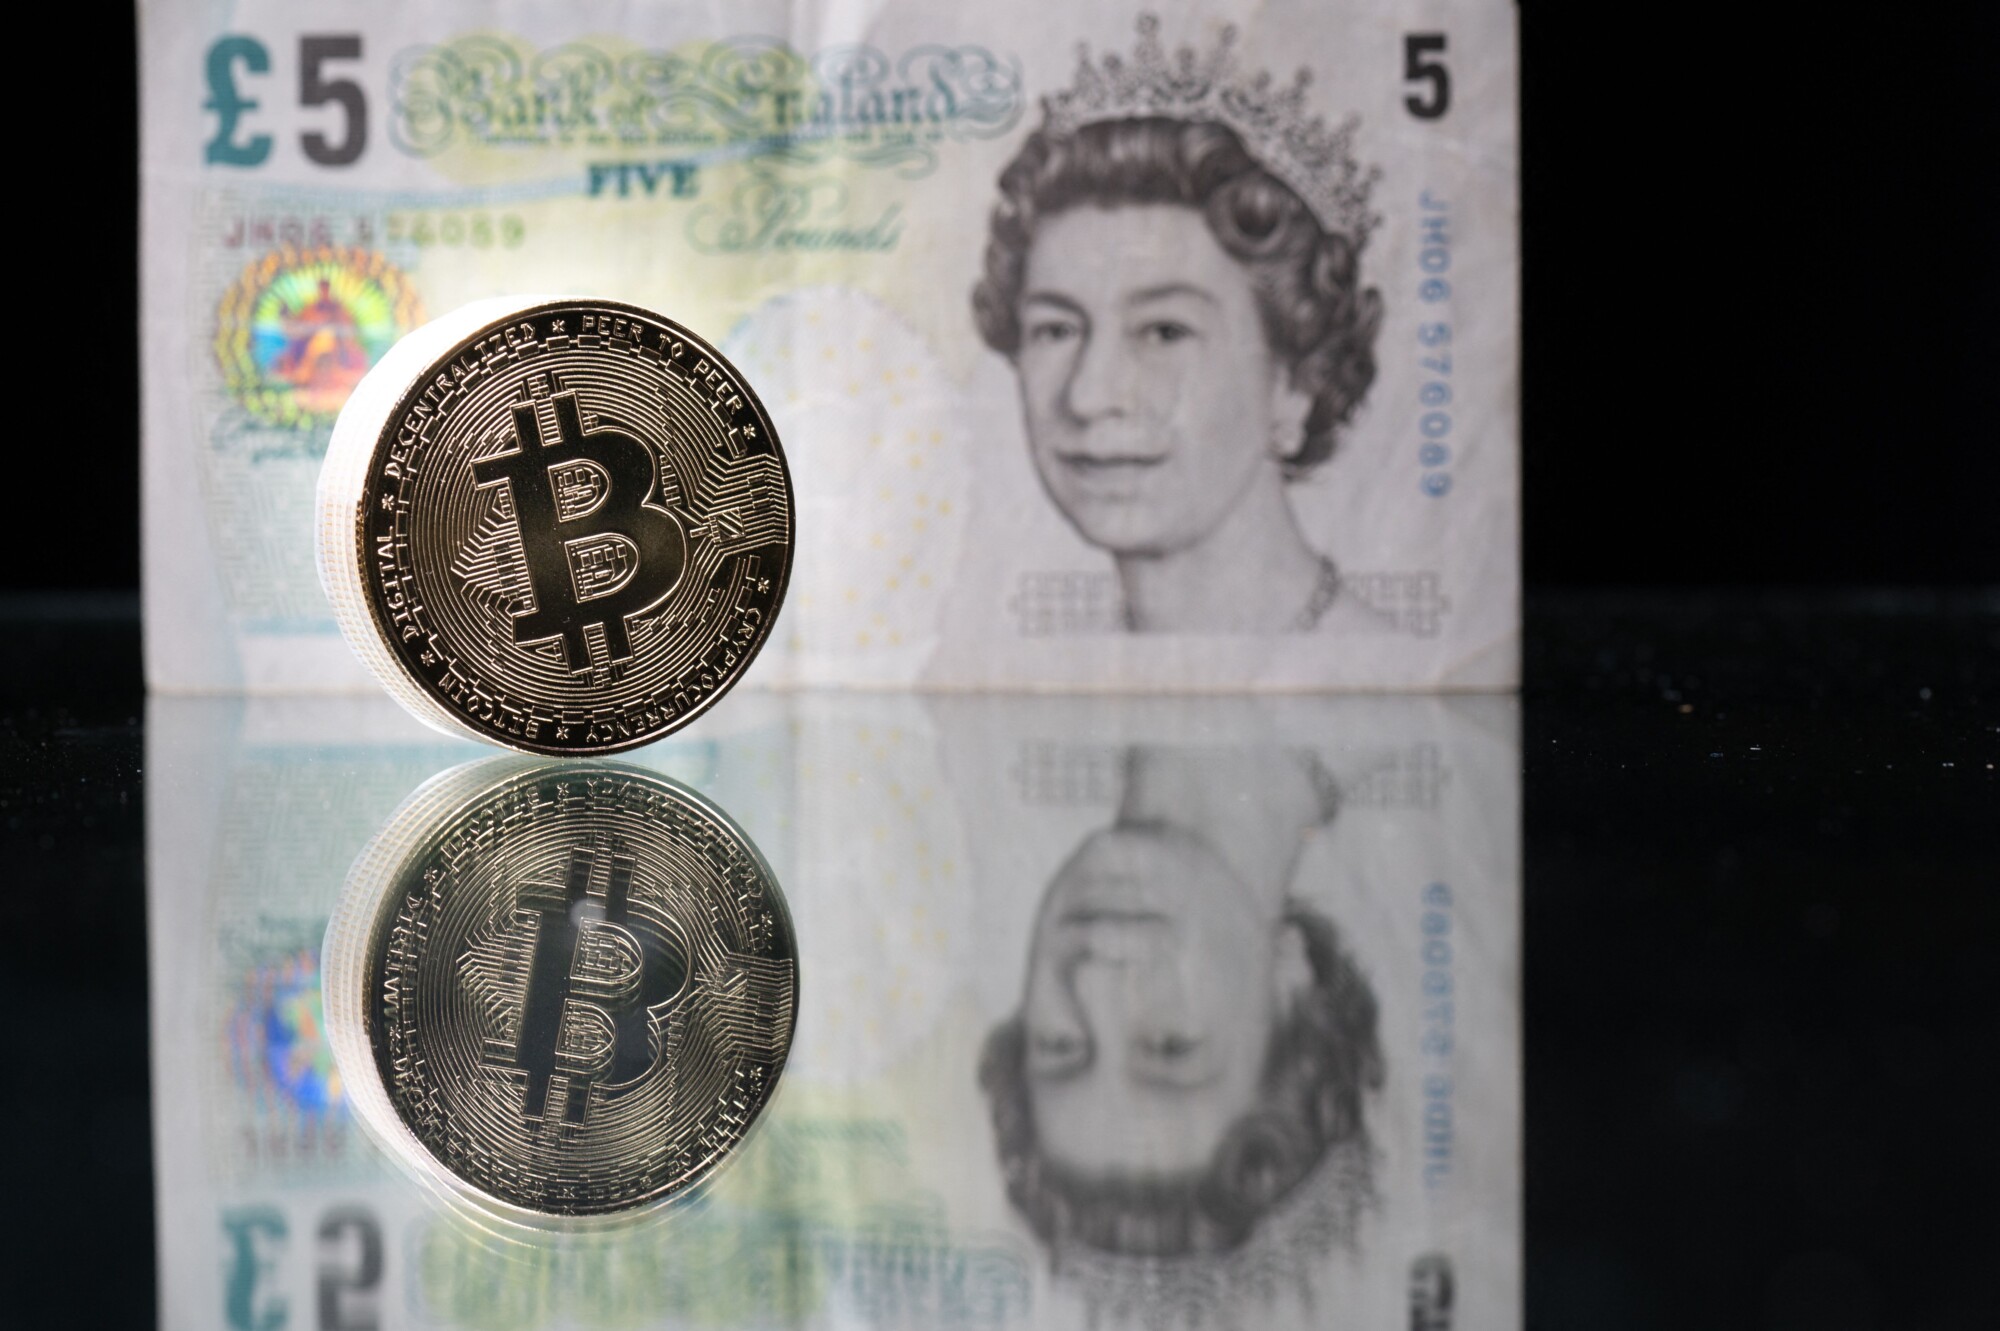 HMRC: Tell Us Your Cryptocurrency Holdings